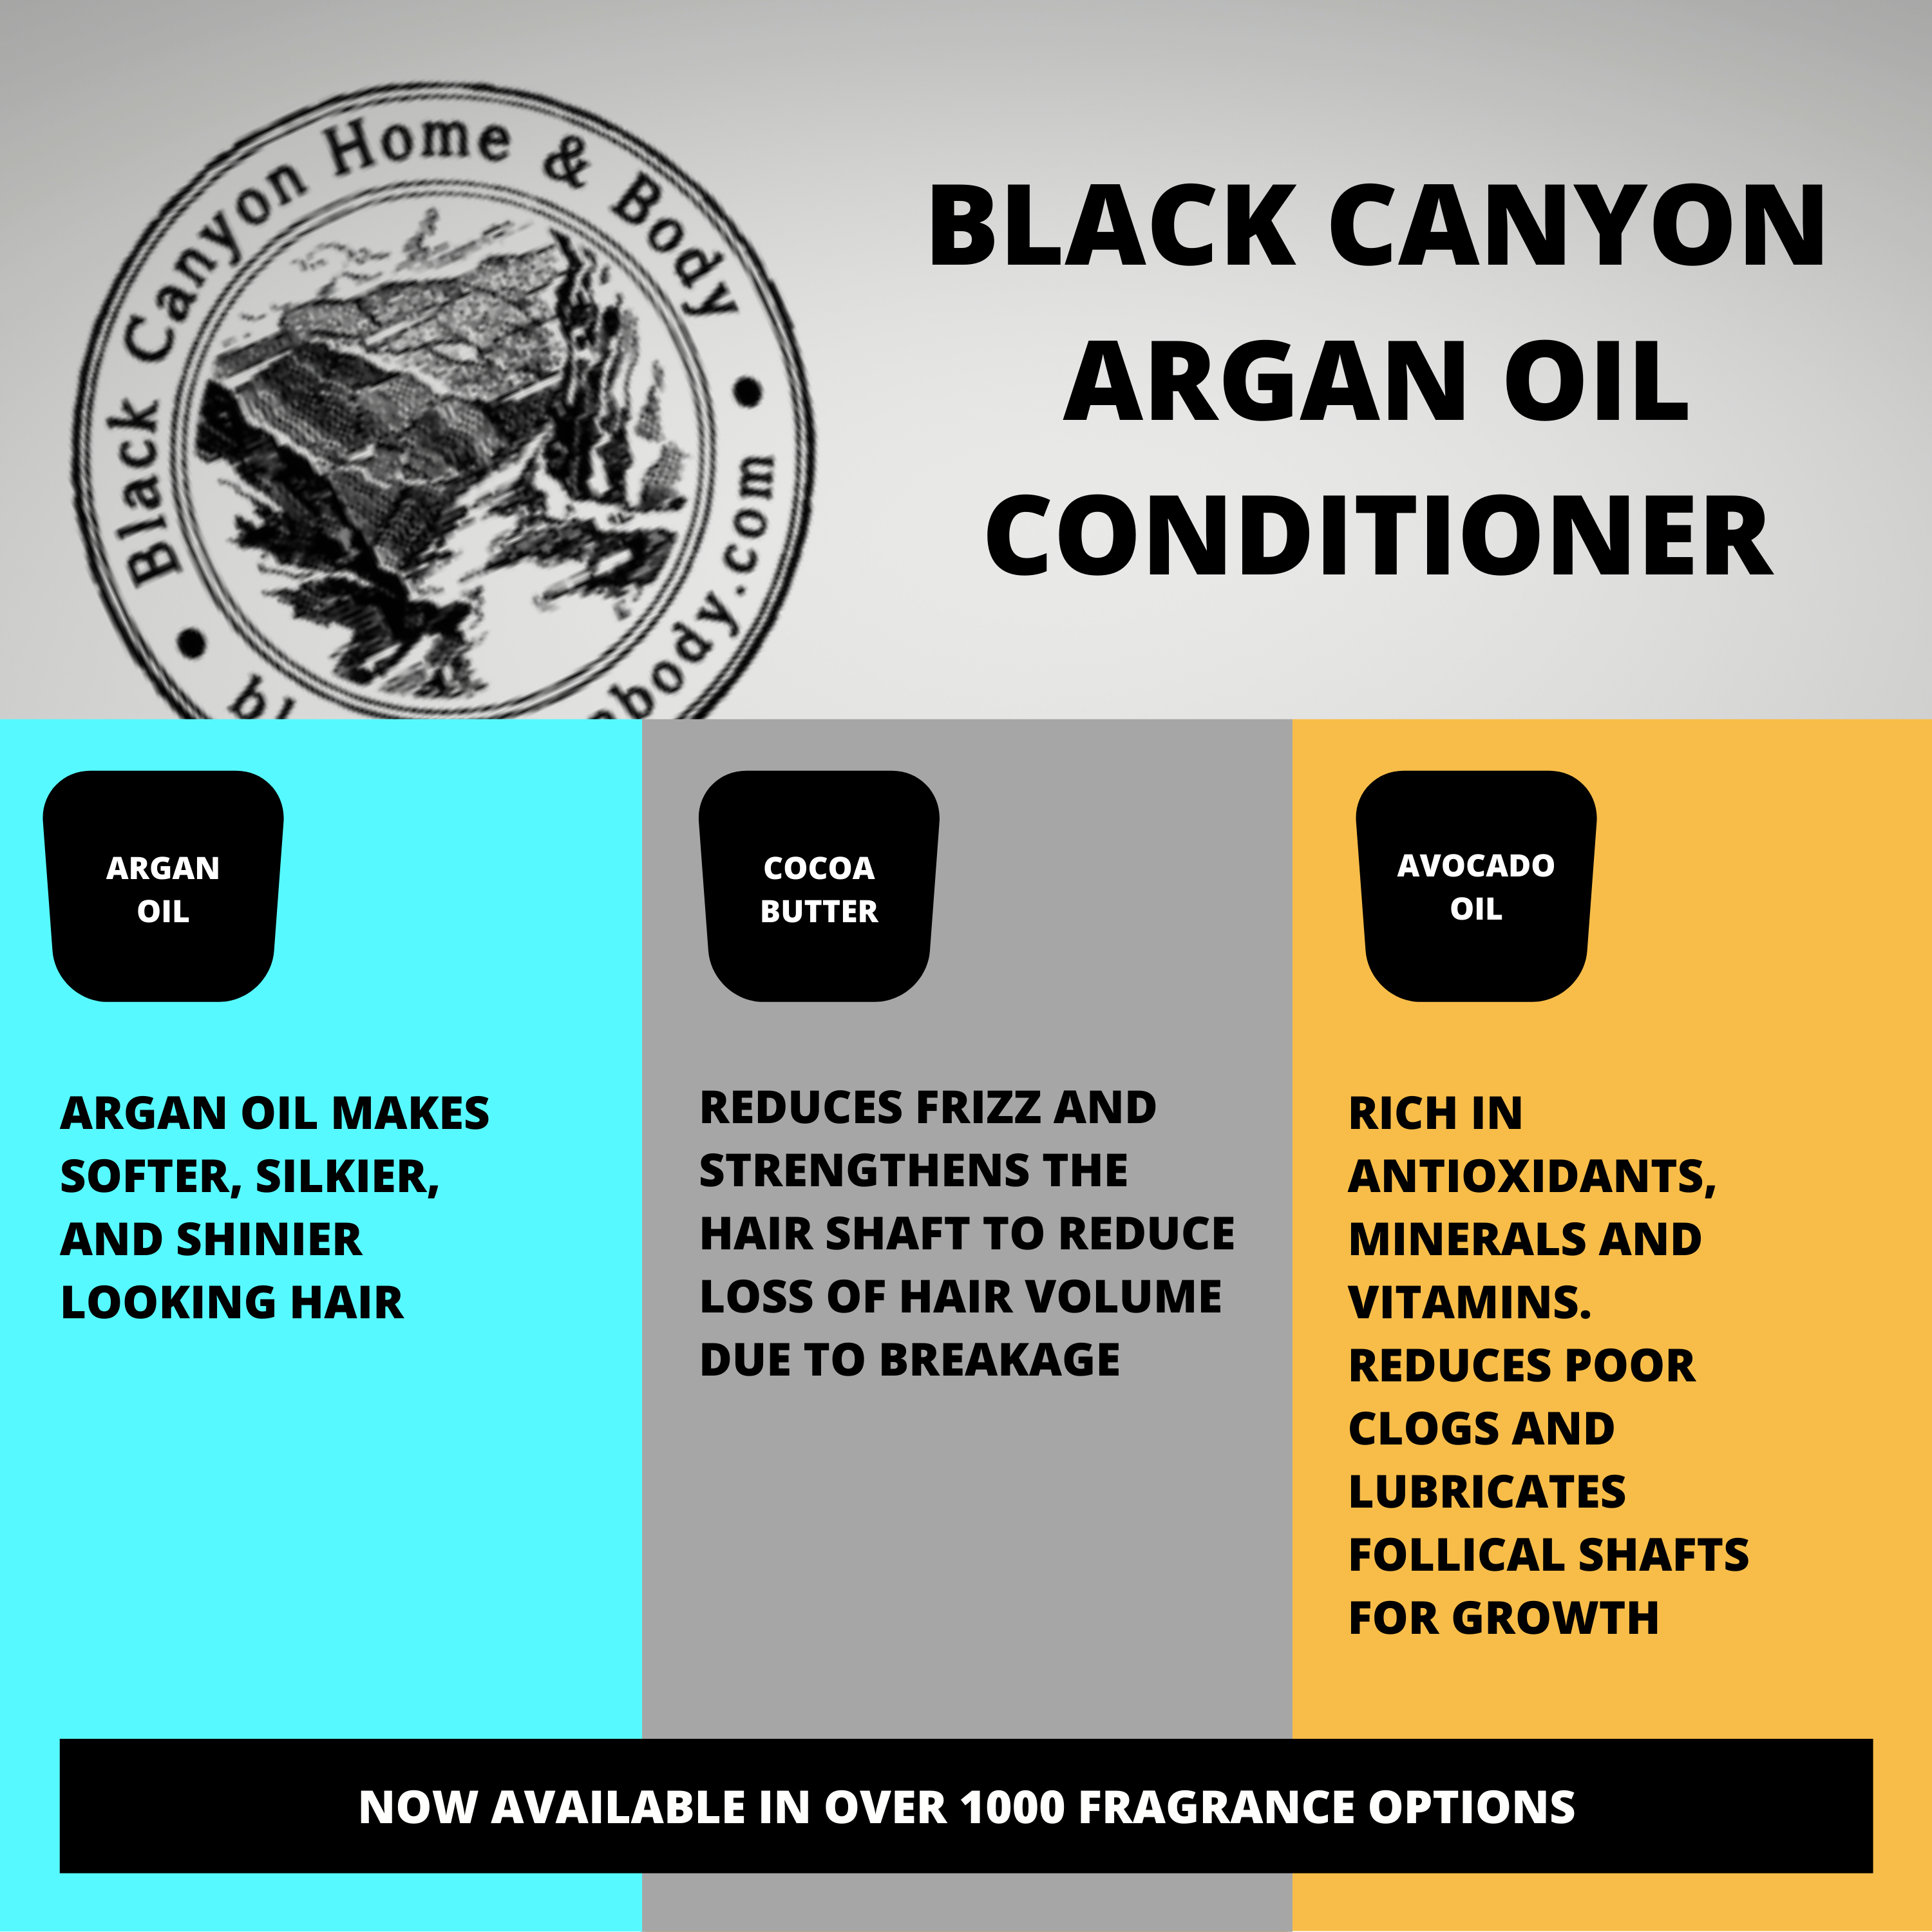 Black Canyon Sweet Peppermint Scented Conditioner with Argan Oil